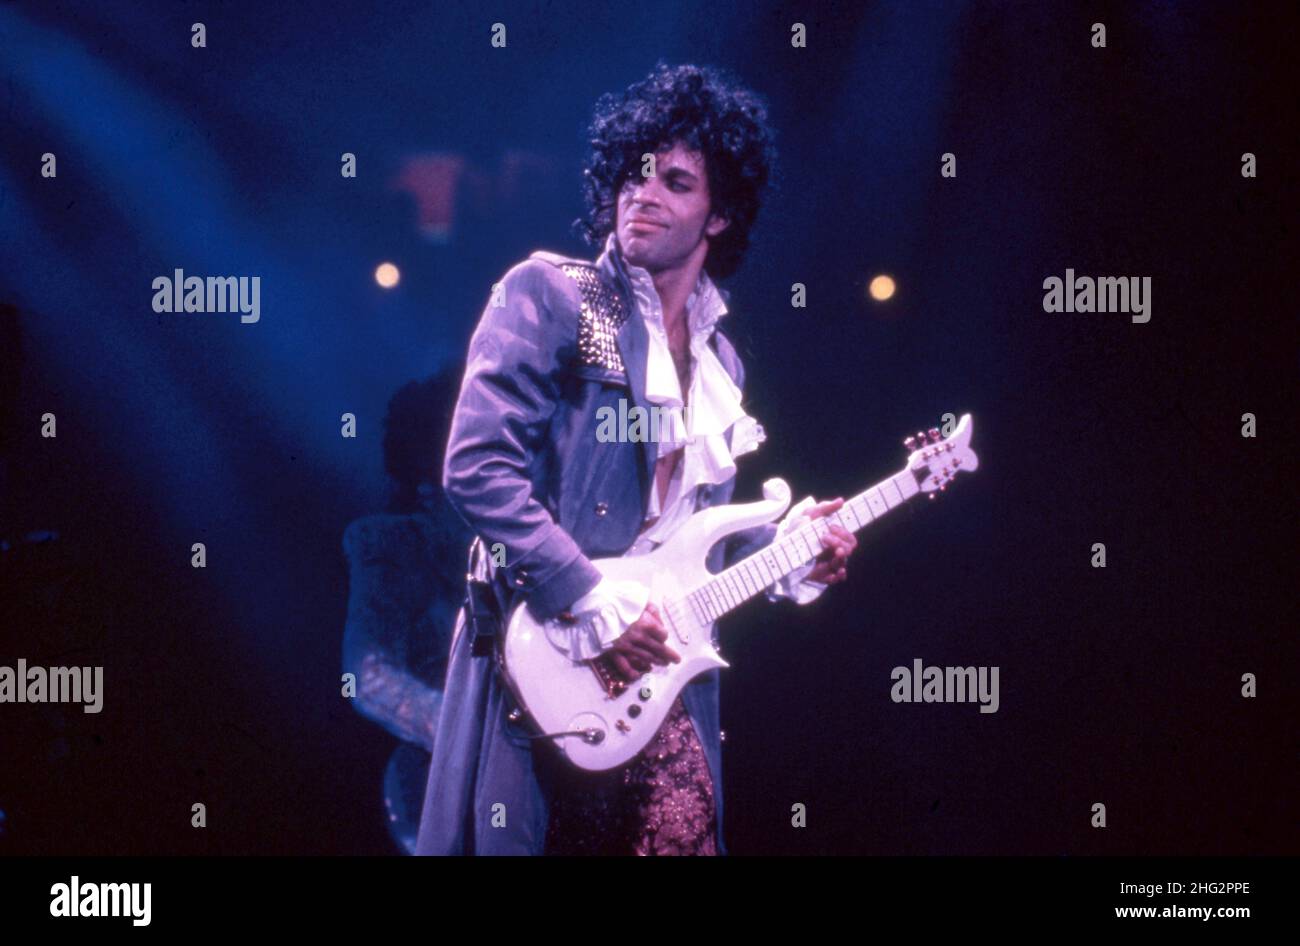 DETROIT, MI - NOVEMBER 4: American singer Prince (1958-2016) performs on stage during the 1984 Purple Rain Tour on November 4, 1984 at the Joe Louis Arena in Detroit, Michigan. Credit: Ross Marino / Rock Negatives / MediaPunch Stock Photo